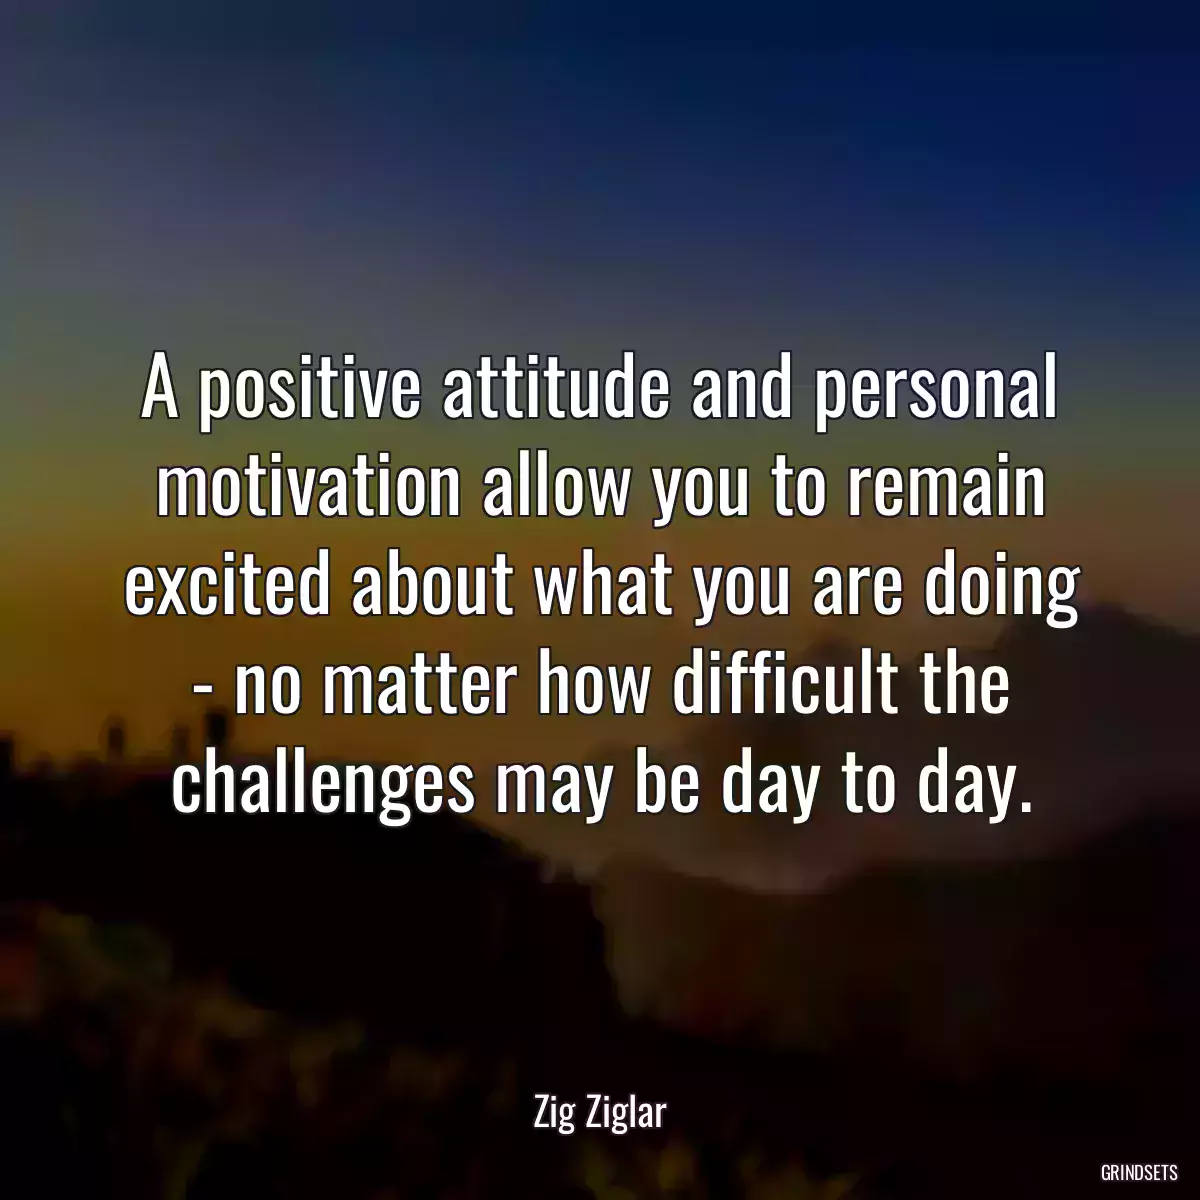 A positive attitude and personal motivation allow you to remain excited about what you are doing - no matter how difficult the challenges may be day to day.